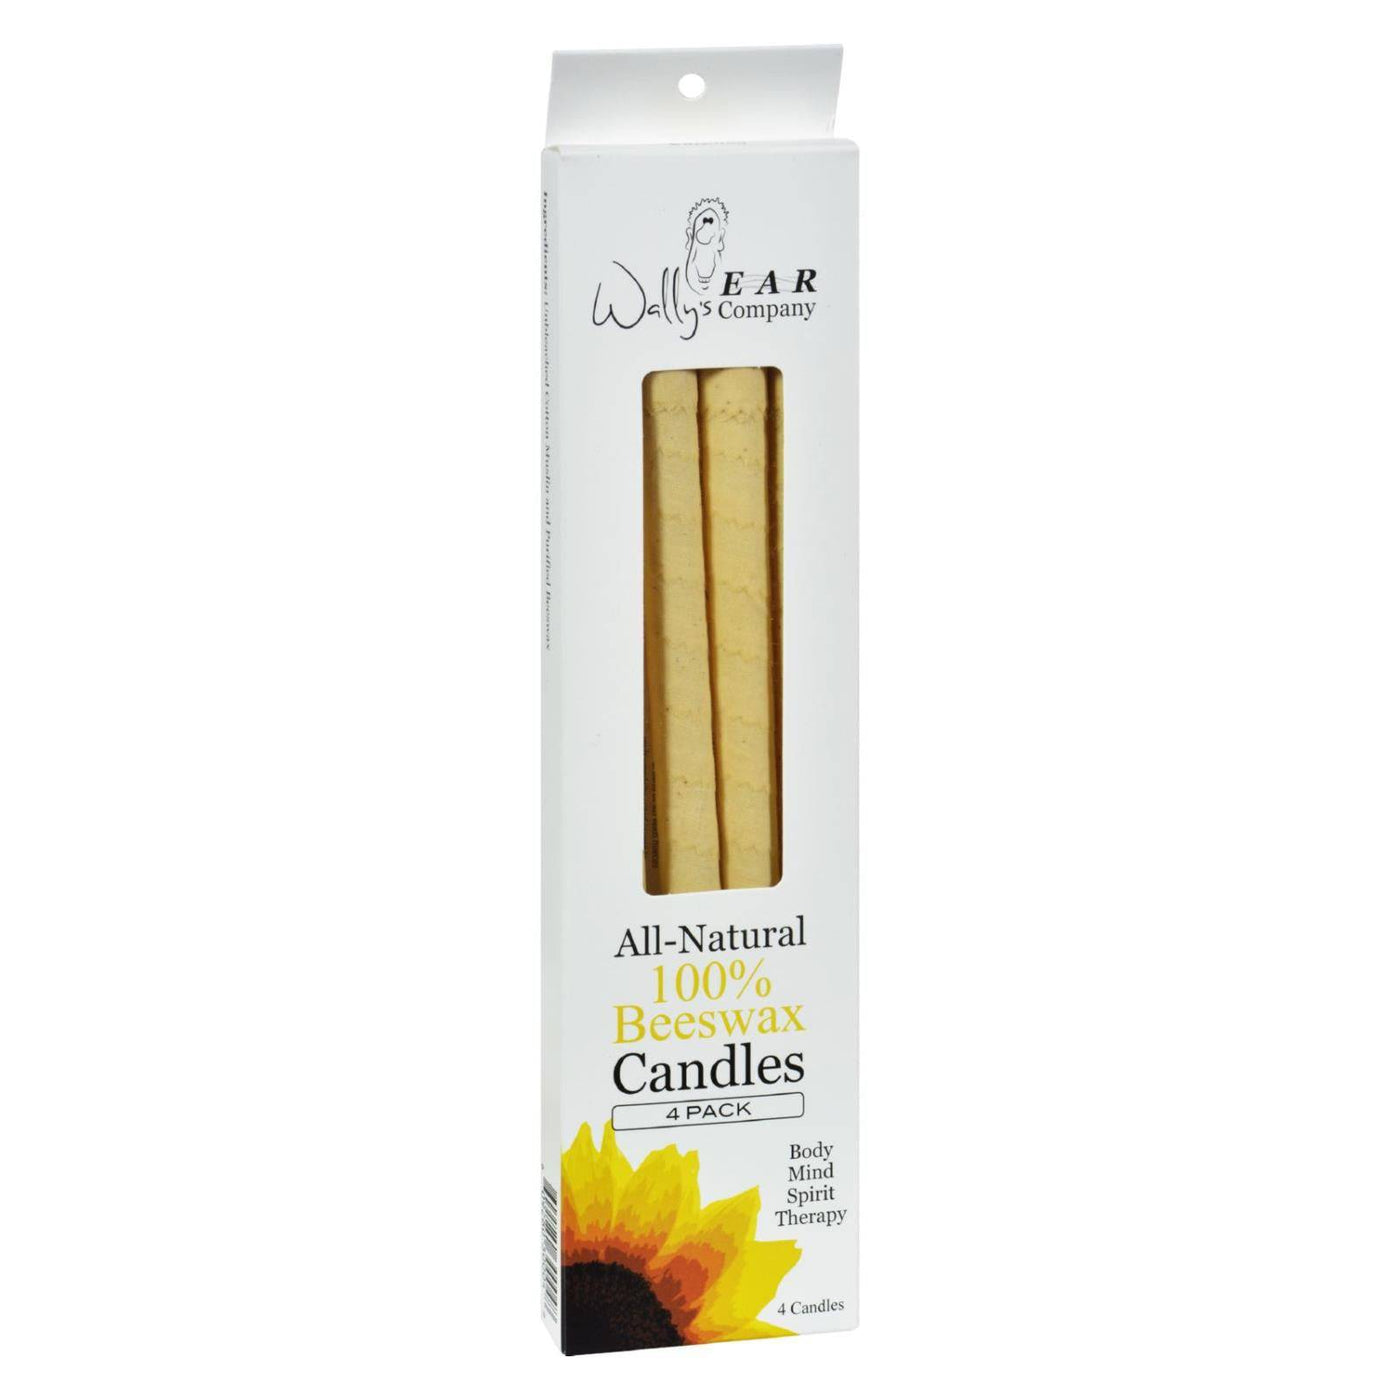 Buy Wally's Ear Candles Beeswax - 4 Candles  at OnlyNaturals.us